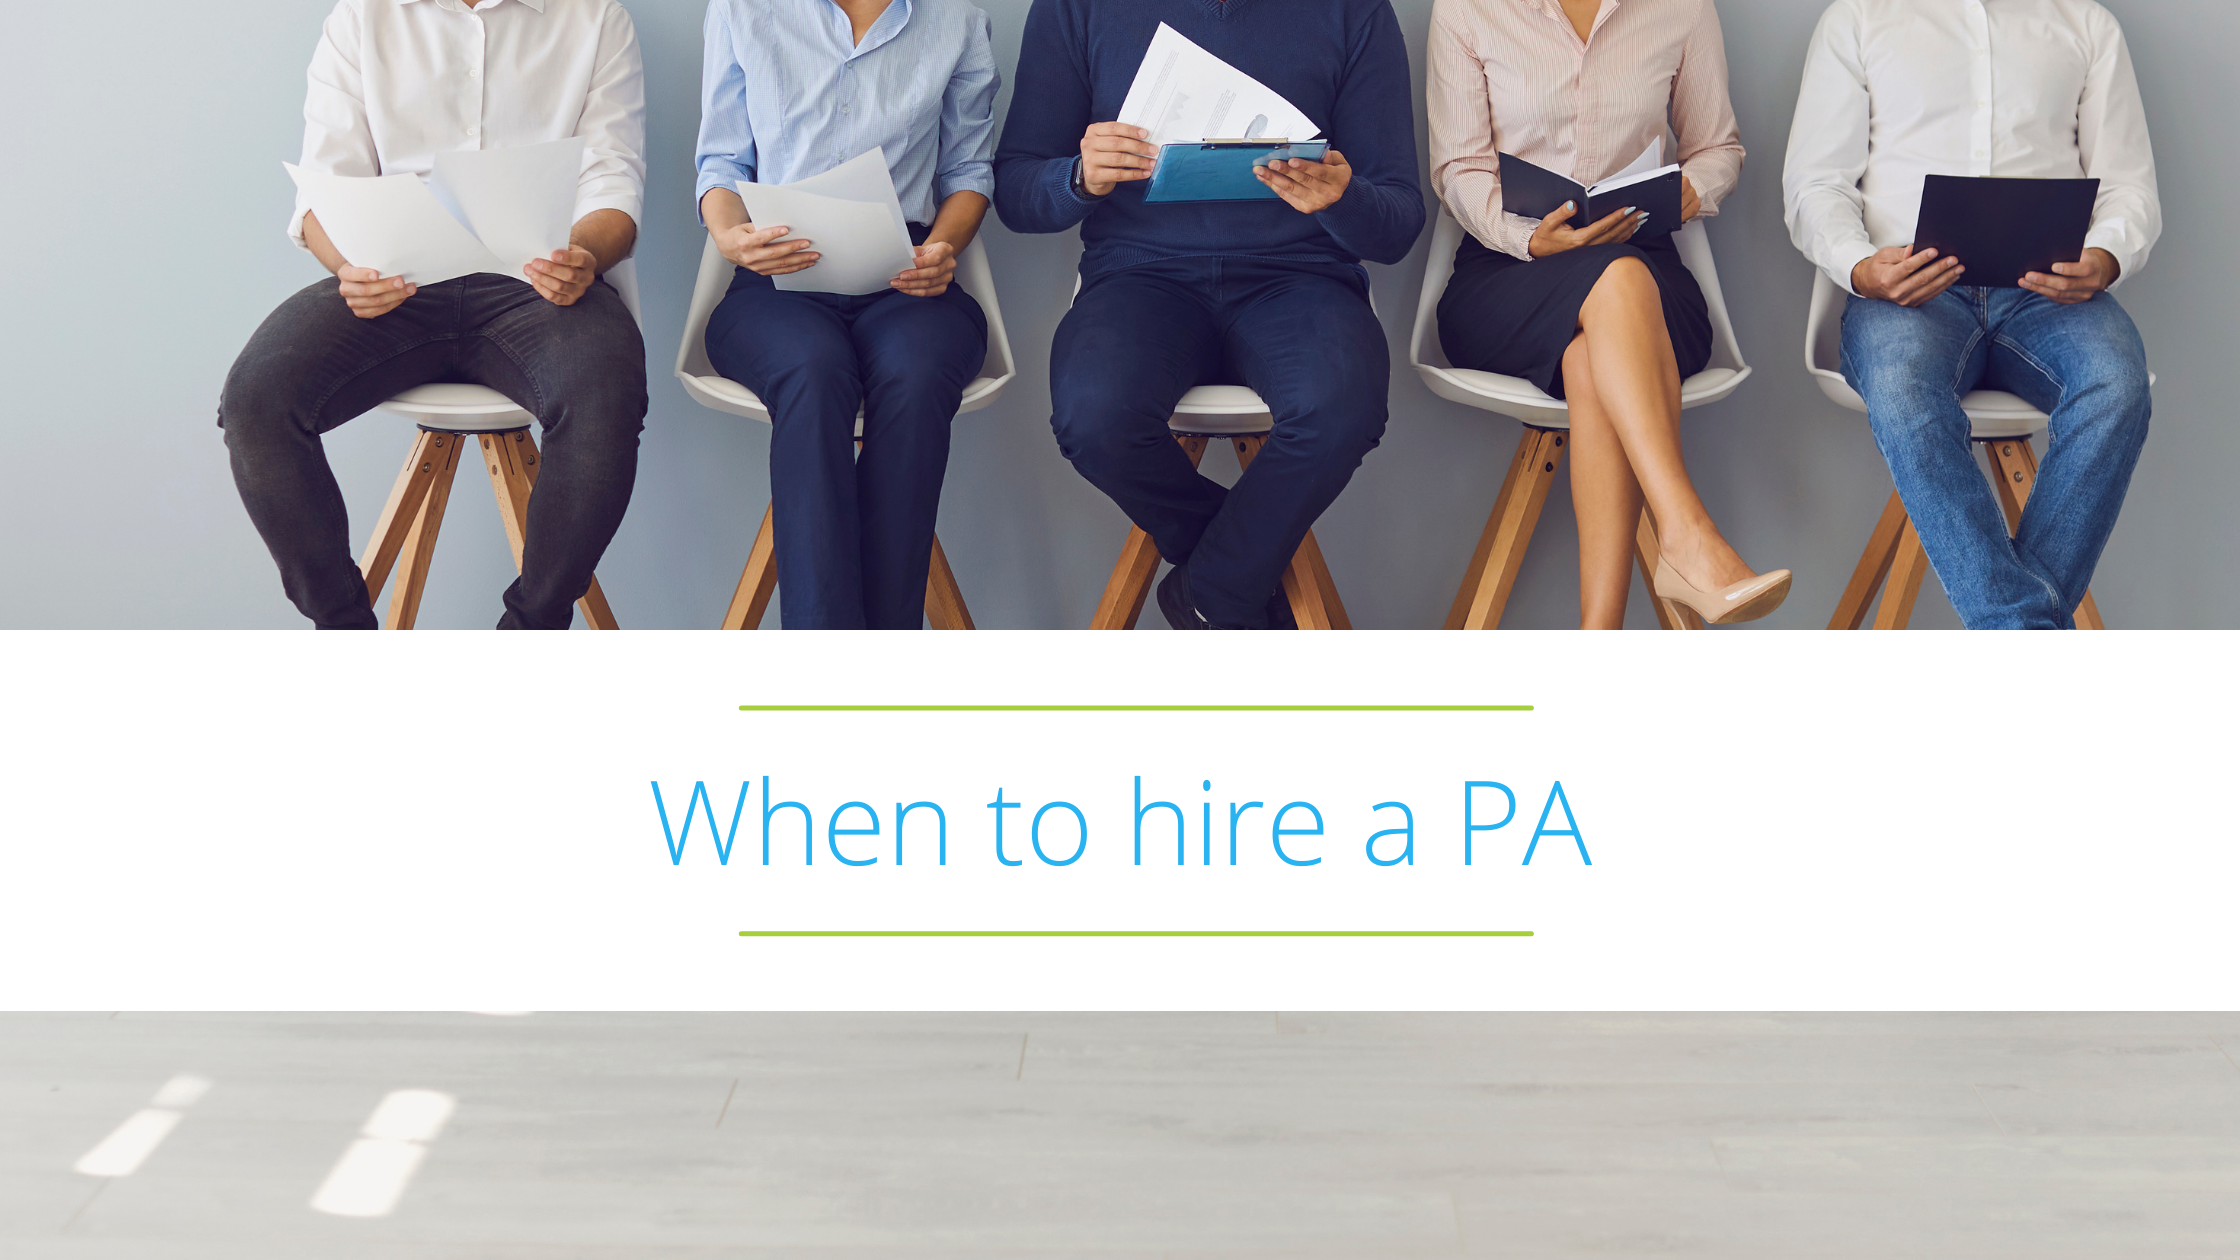 When to hire a PA